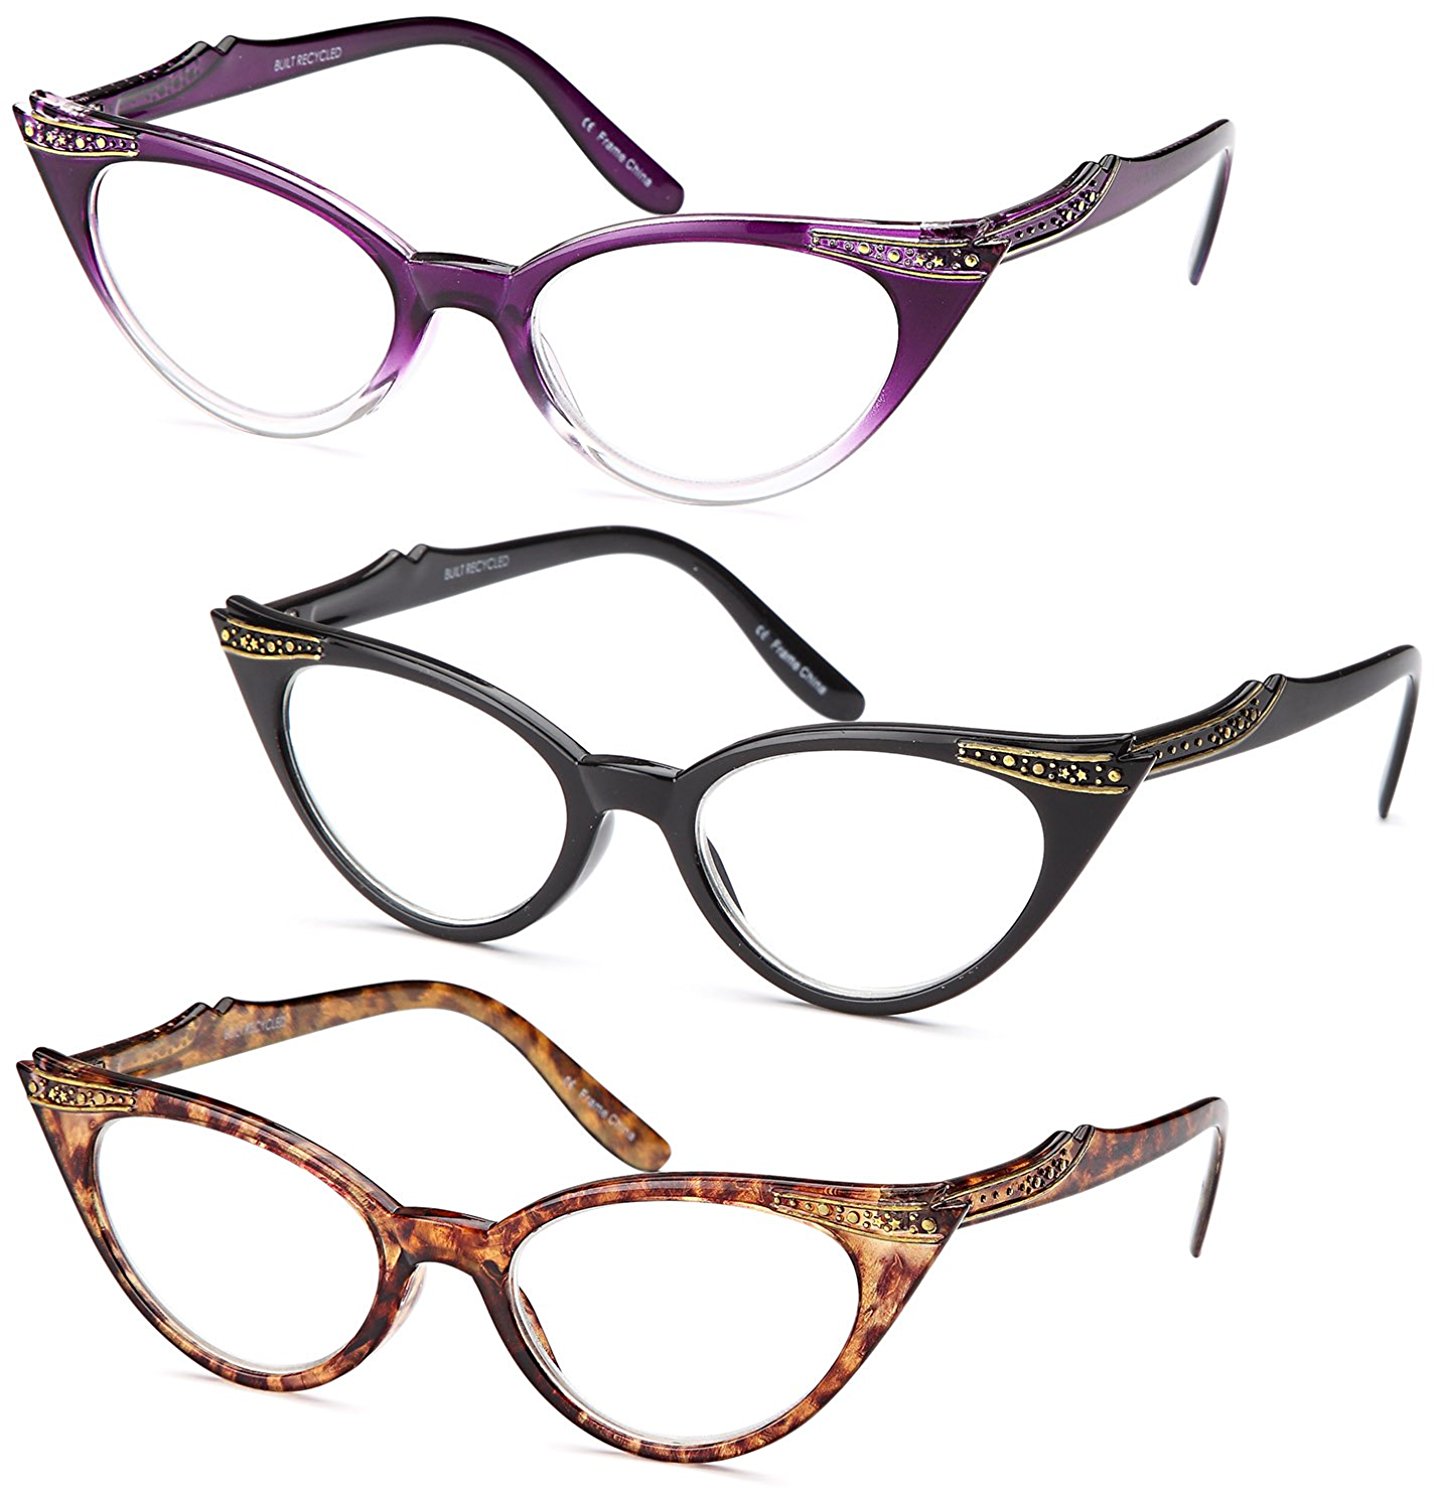 GAMMA RAY READERS 3 Pairs Ladies' Vintage Cat Eye Readers Quality Reading Glasses for Women